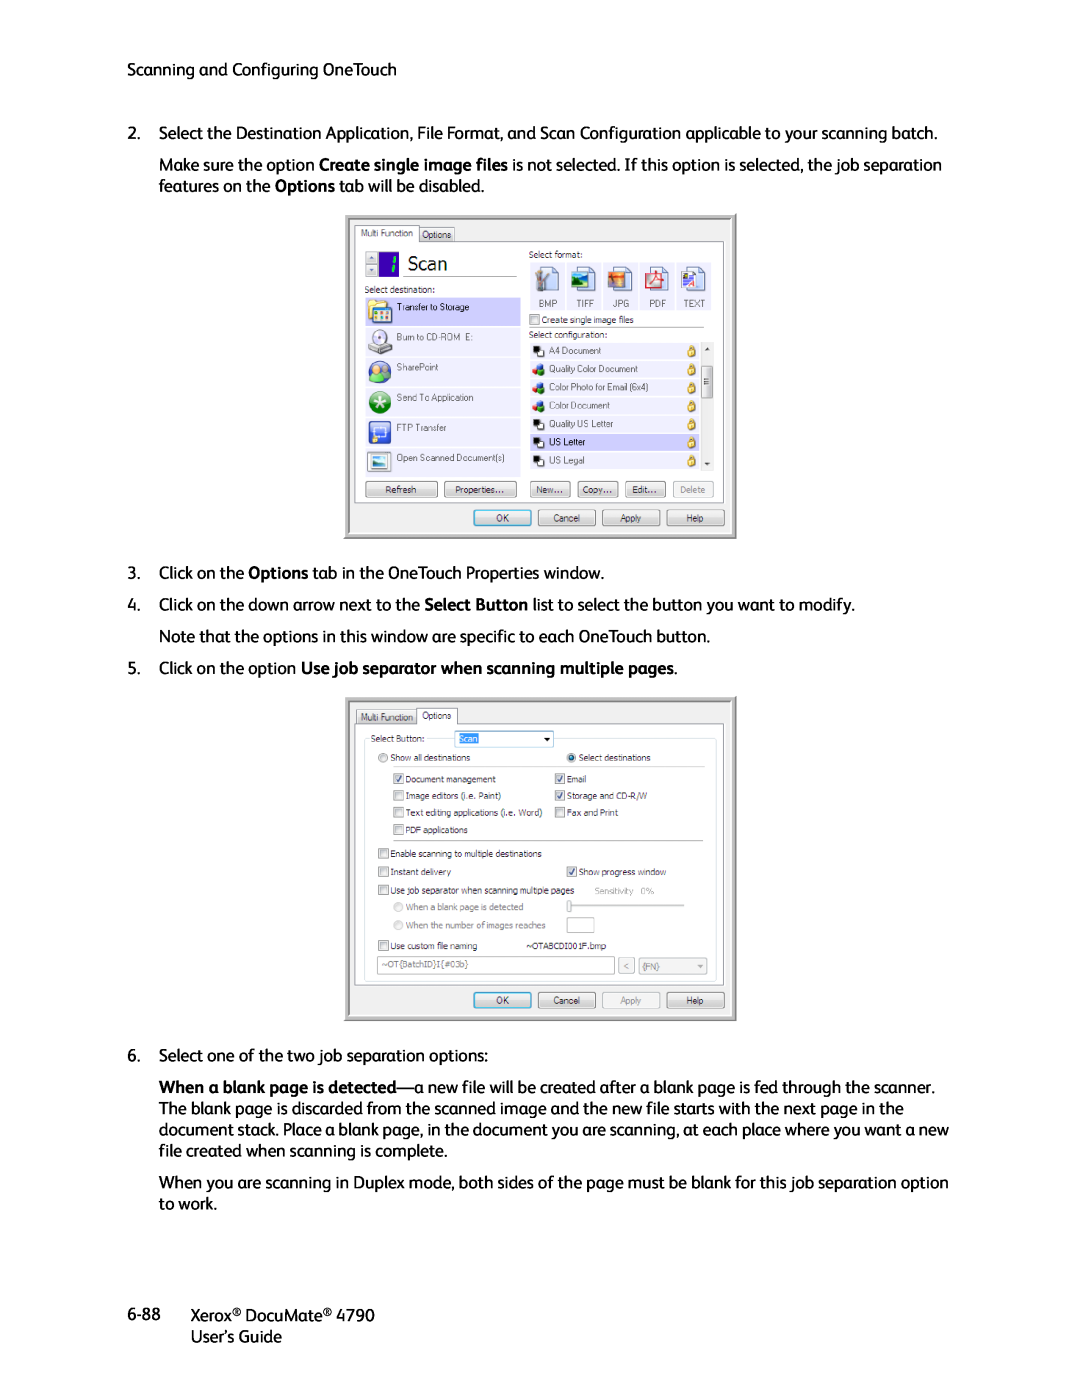 Xerox xerox documate manual Click on the option Use job separator when scanning multiple pages 